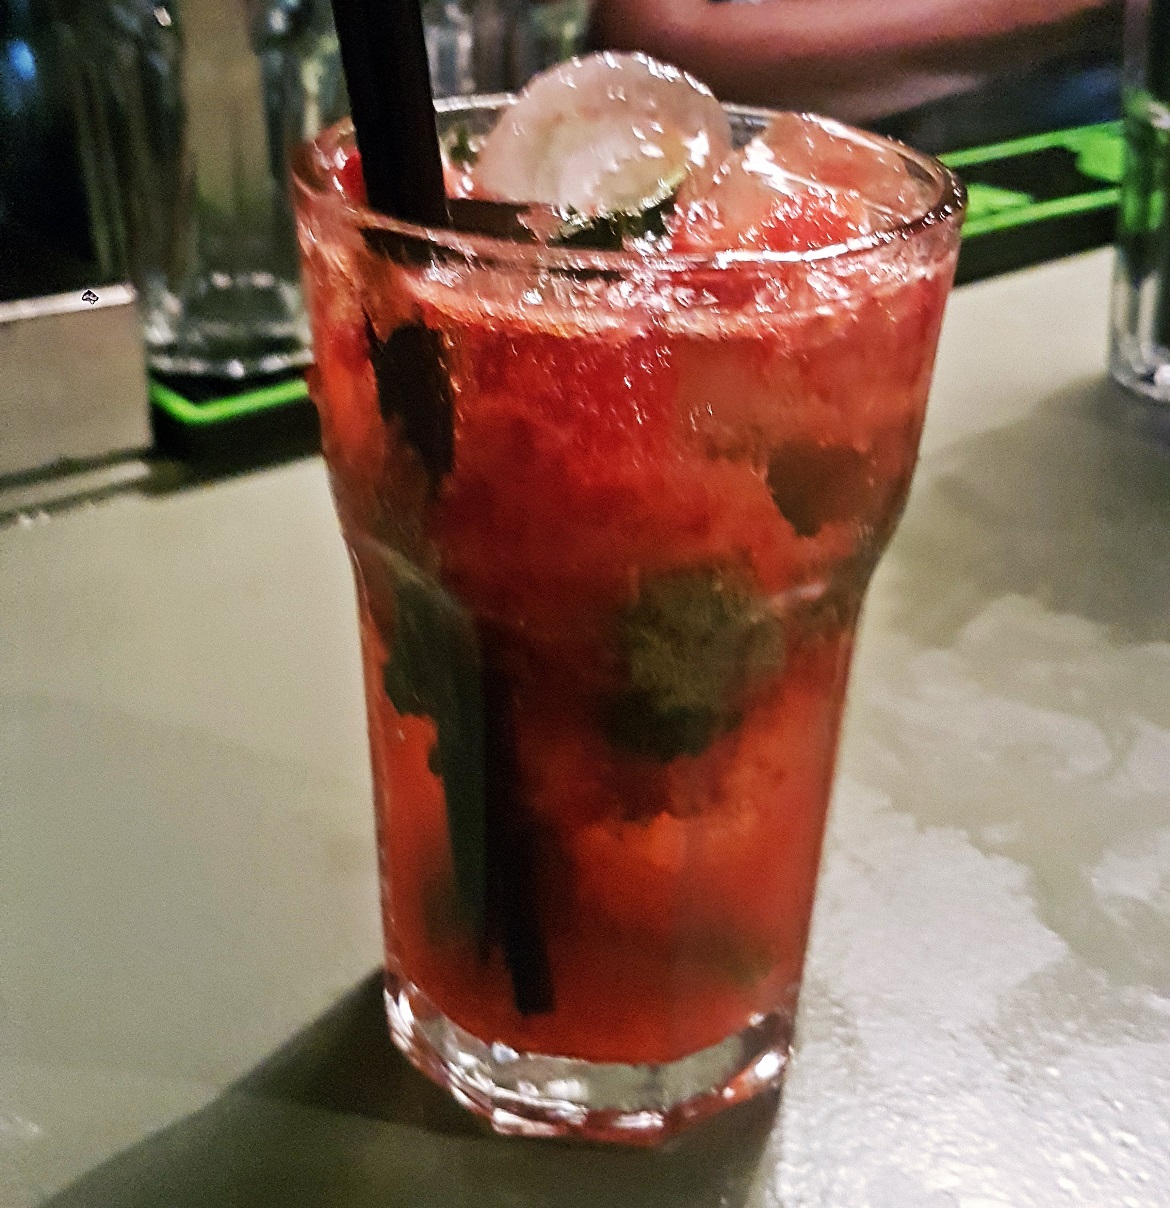 Mojito de Morango at Park Bar - Food and Drink in Lisbon, review by BeckyBecky Blogs